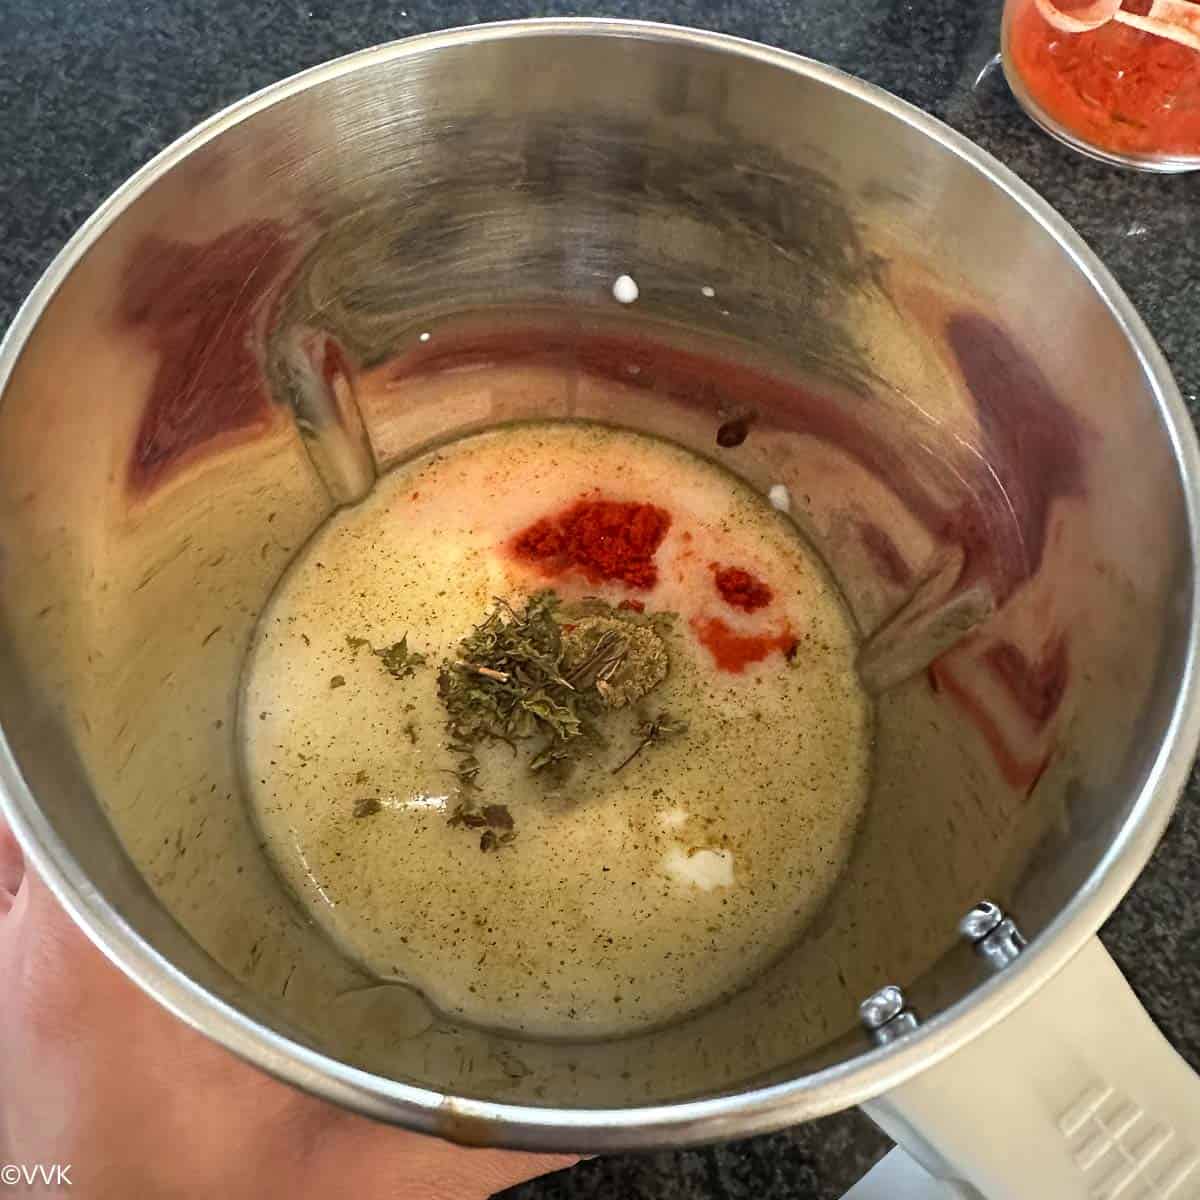 adding all the ingredients to the blender